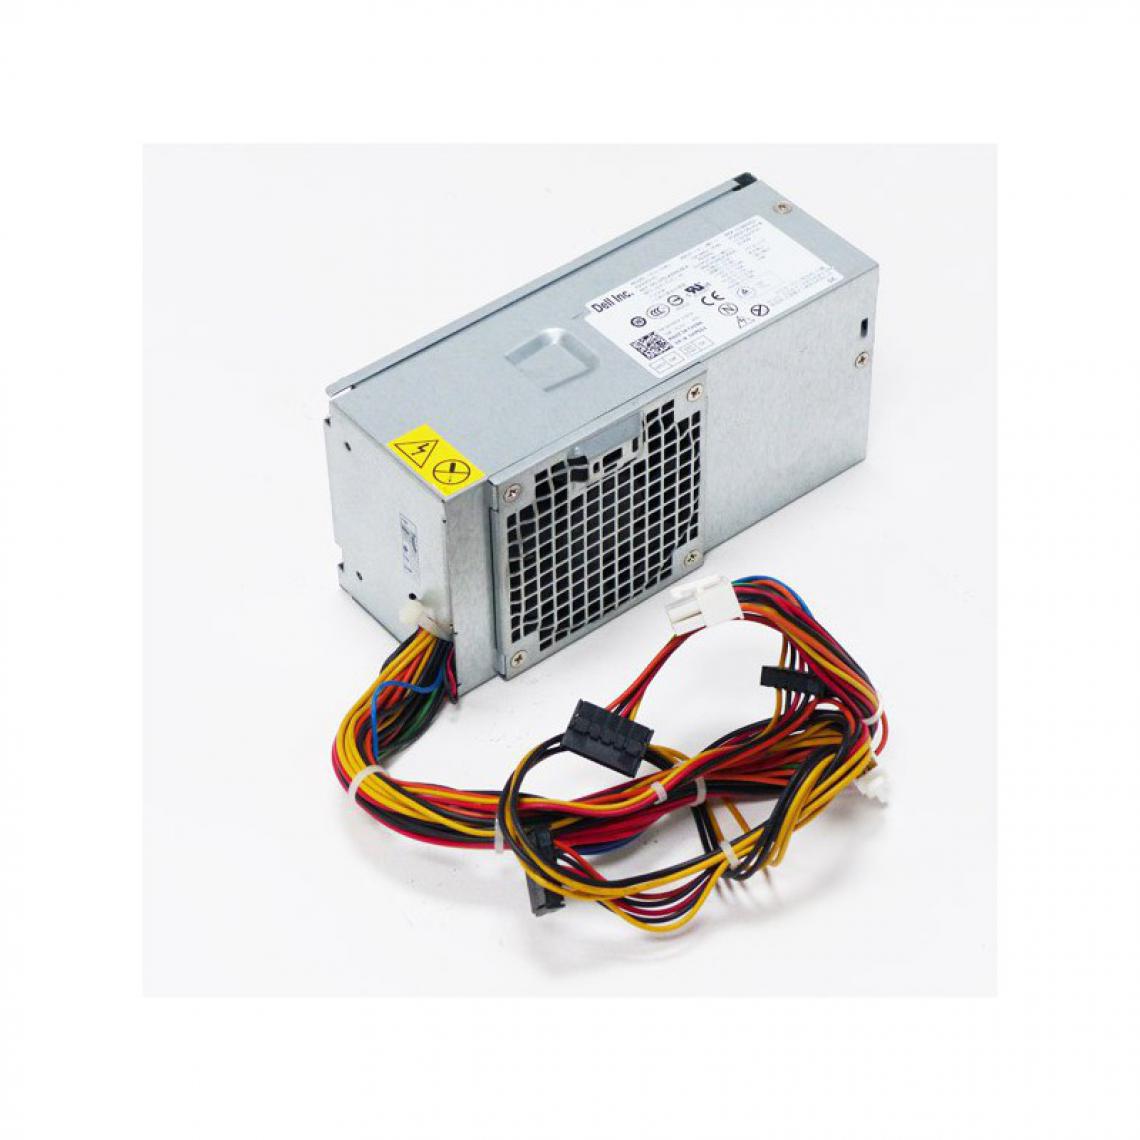 Dell - Alimentation DELL Optiplex 9010 DT L250AD-00 PS-5251-01D FY9H3 250W Power Supply - Alimentation modulaire